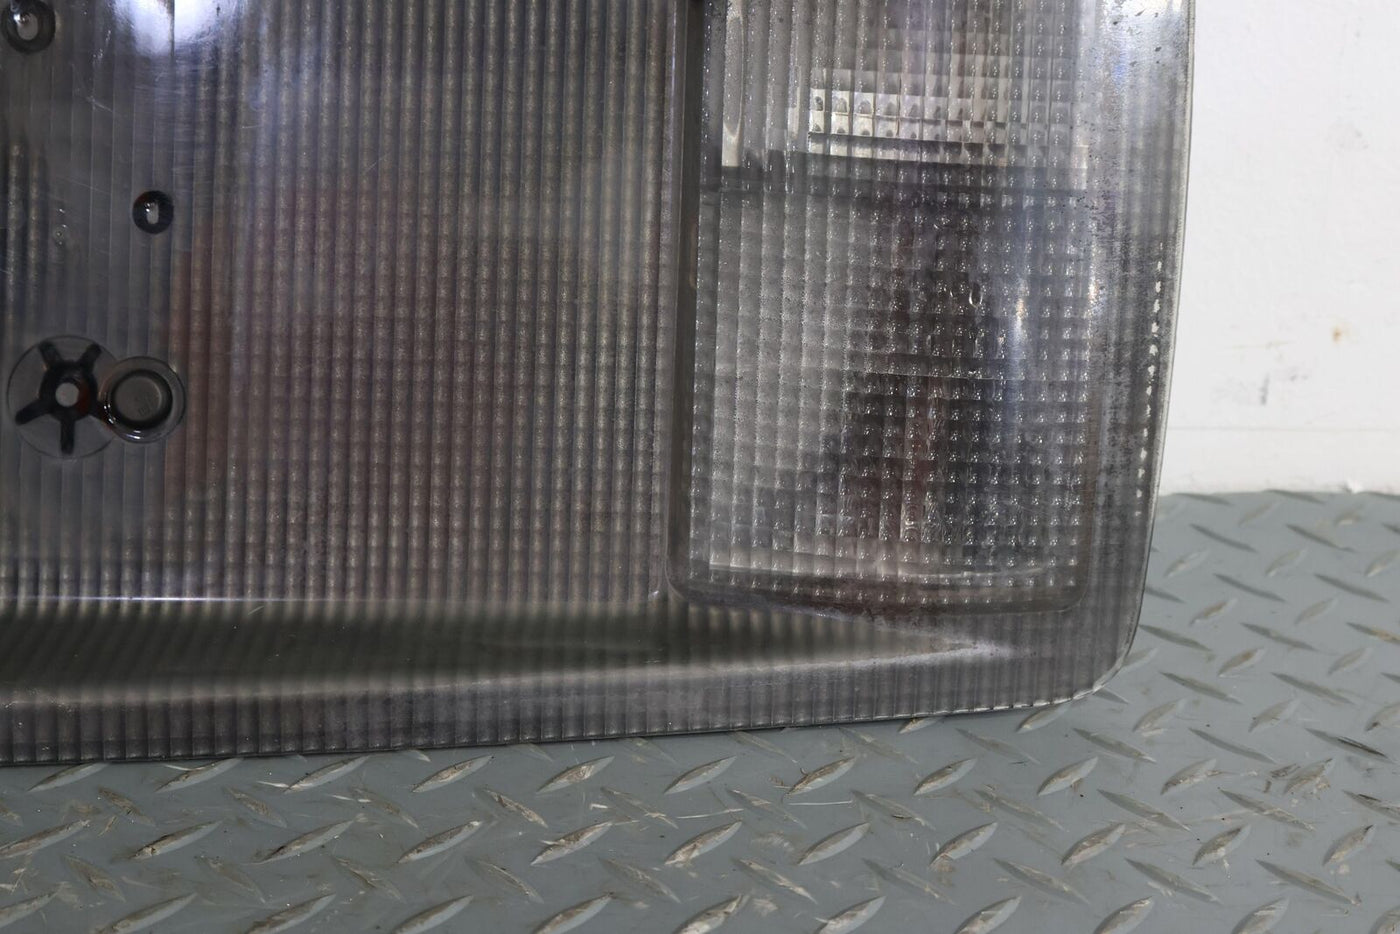 04-09 Cadillac XLR Tail Finish Panel (Faux Carbon Fiber) With Reverse Lights